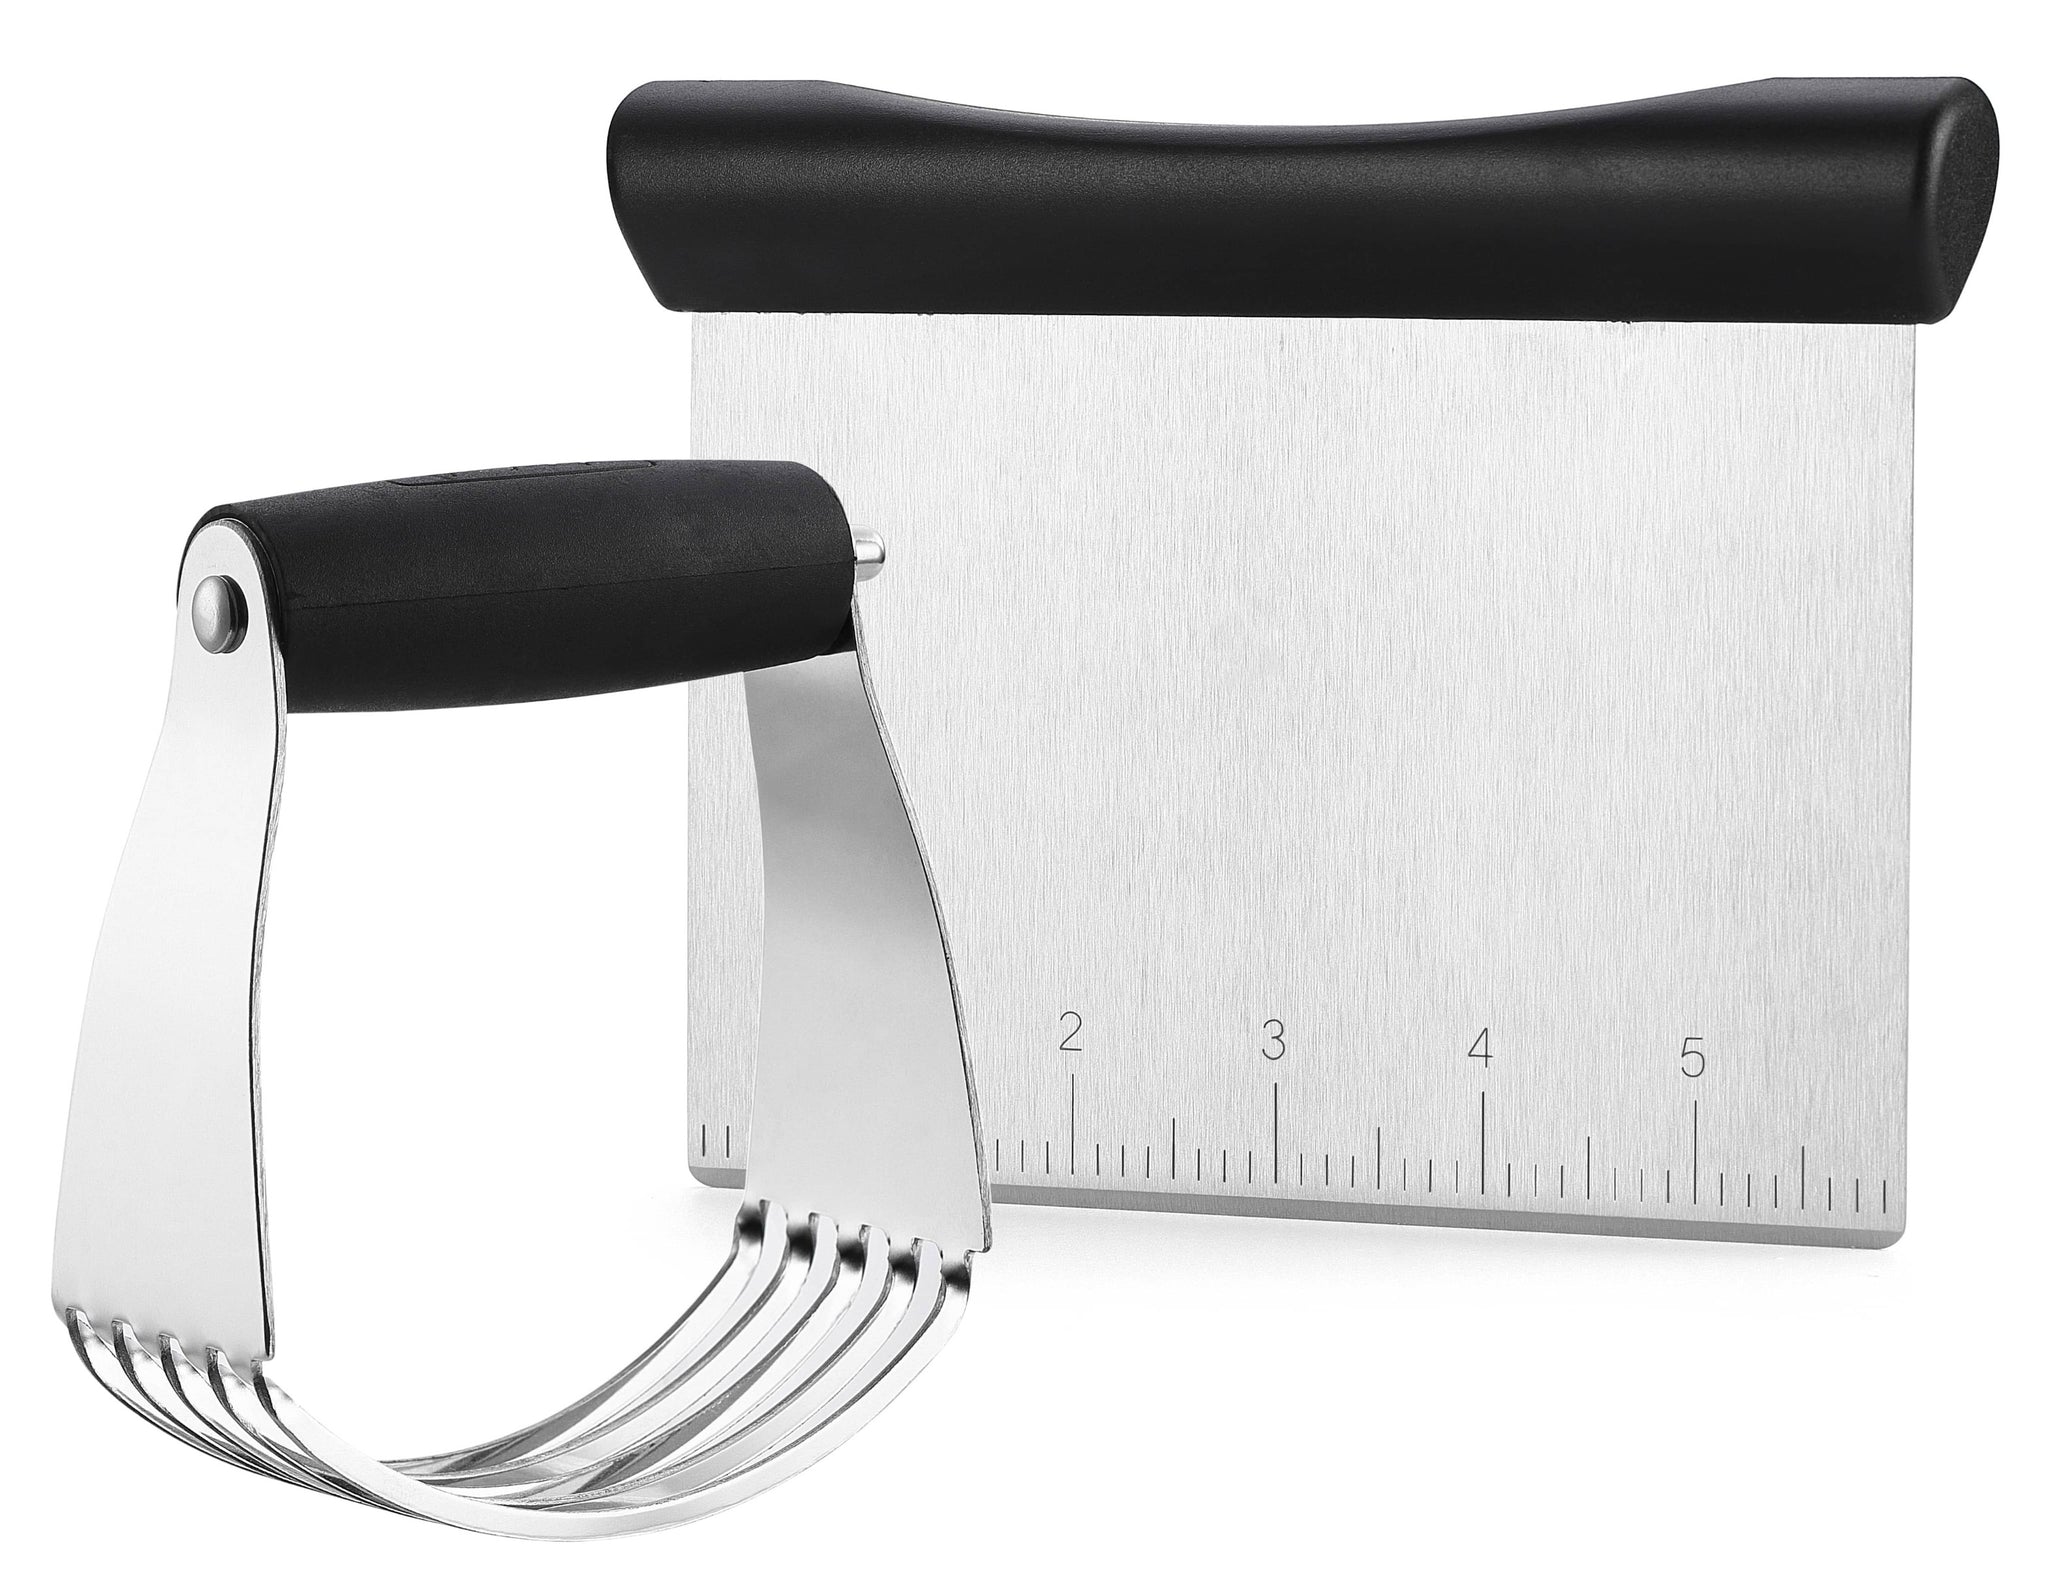 Choice 6 x 4 1/4 Stainless Steel Dough Cutter / Bench Scraper with Black  Handle